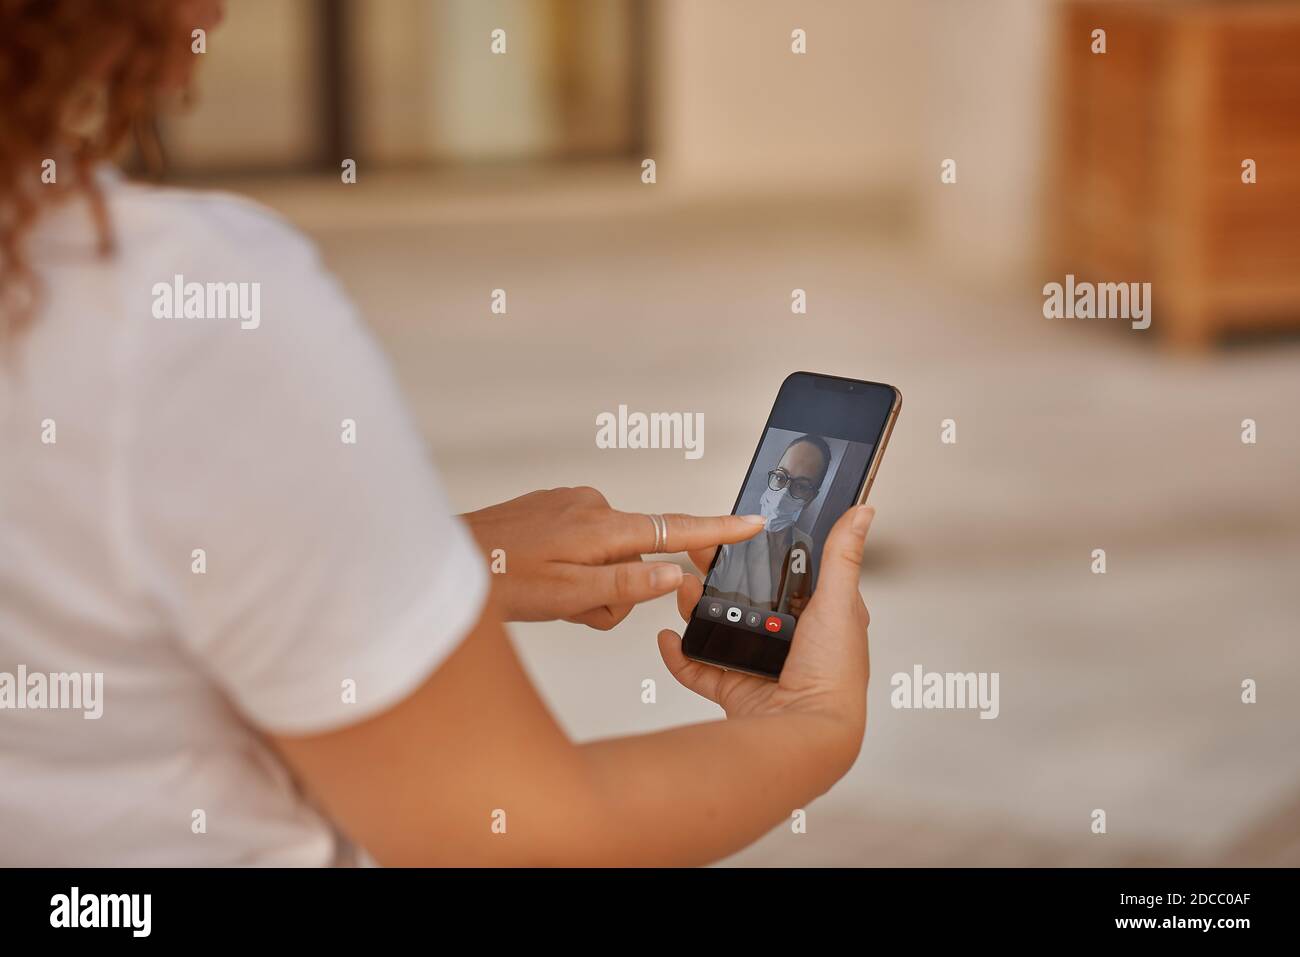 Mobile screen with a woman on video chat Stock Photo